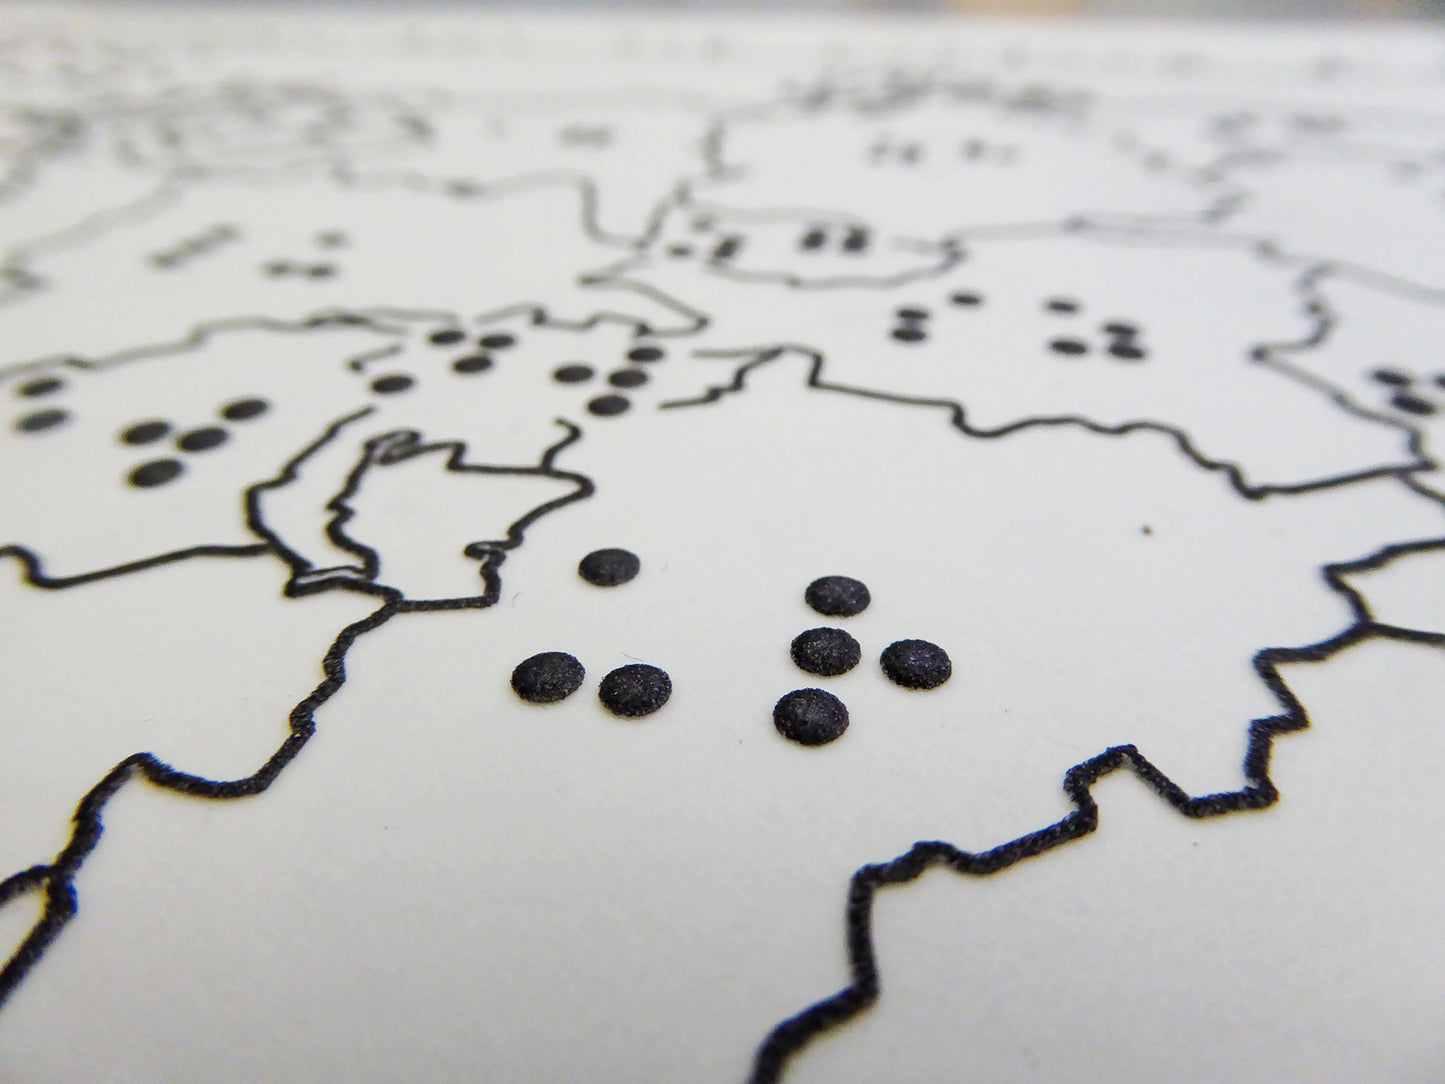 Close up view of the Braille and Tactile World Map with black borders and black braille dots on a white background.